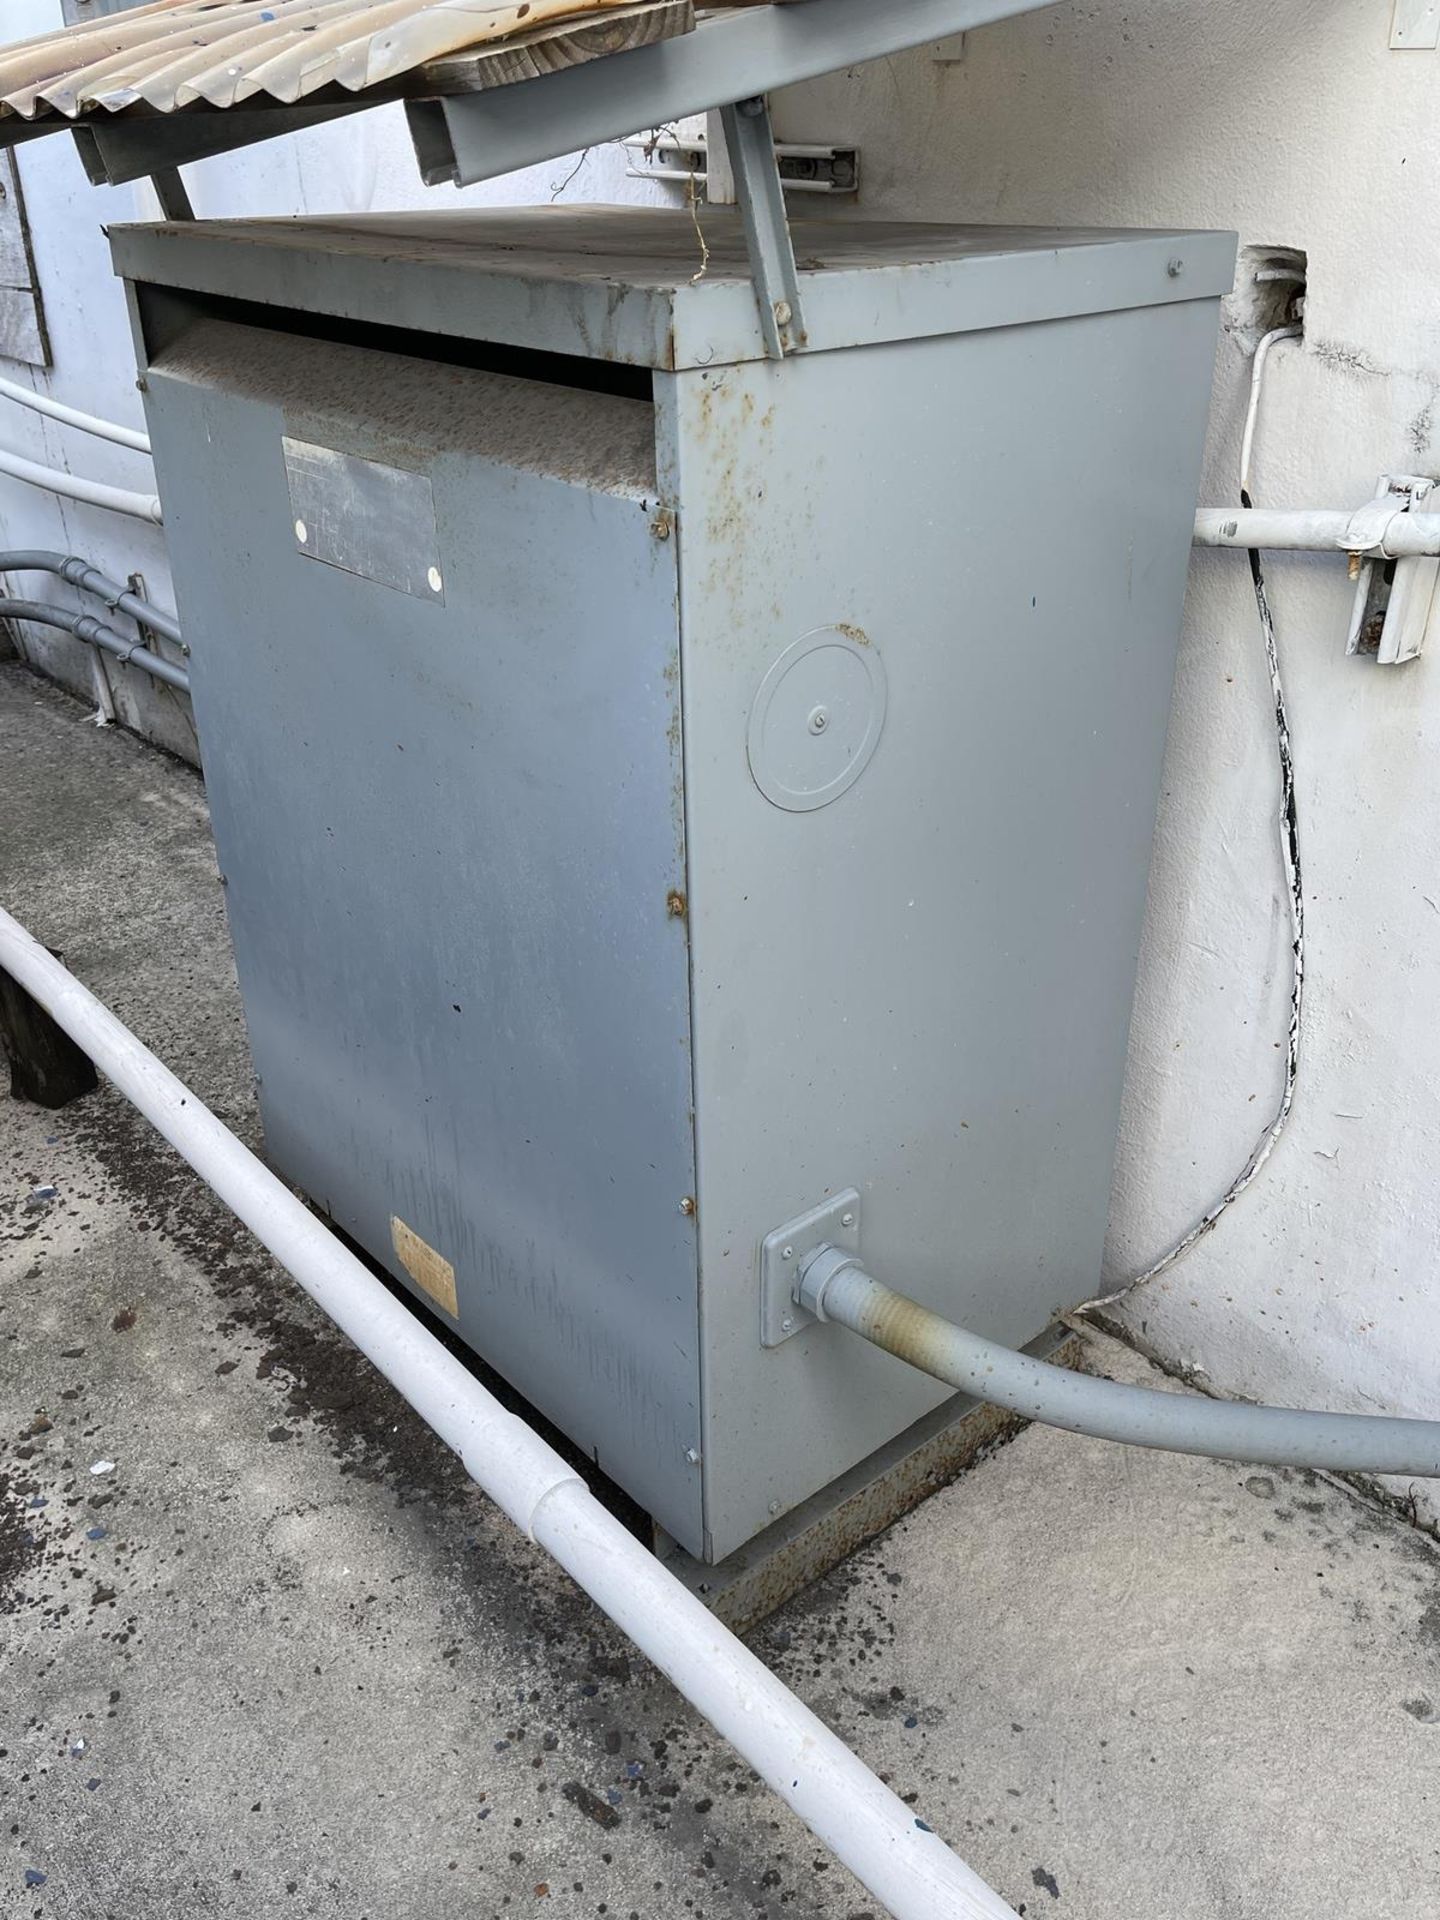 2014 Carrier Model 30RAP010-090 Aquasnap Chiller, 10 RT, Air Cooled - Subj to Bulk | Rig Fee $1000 - Image 6 of 9